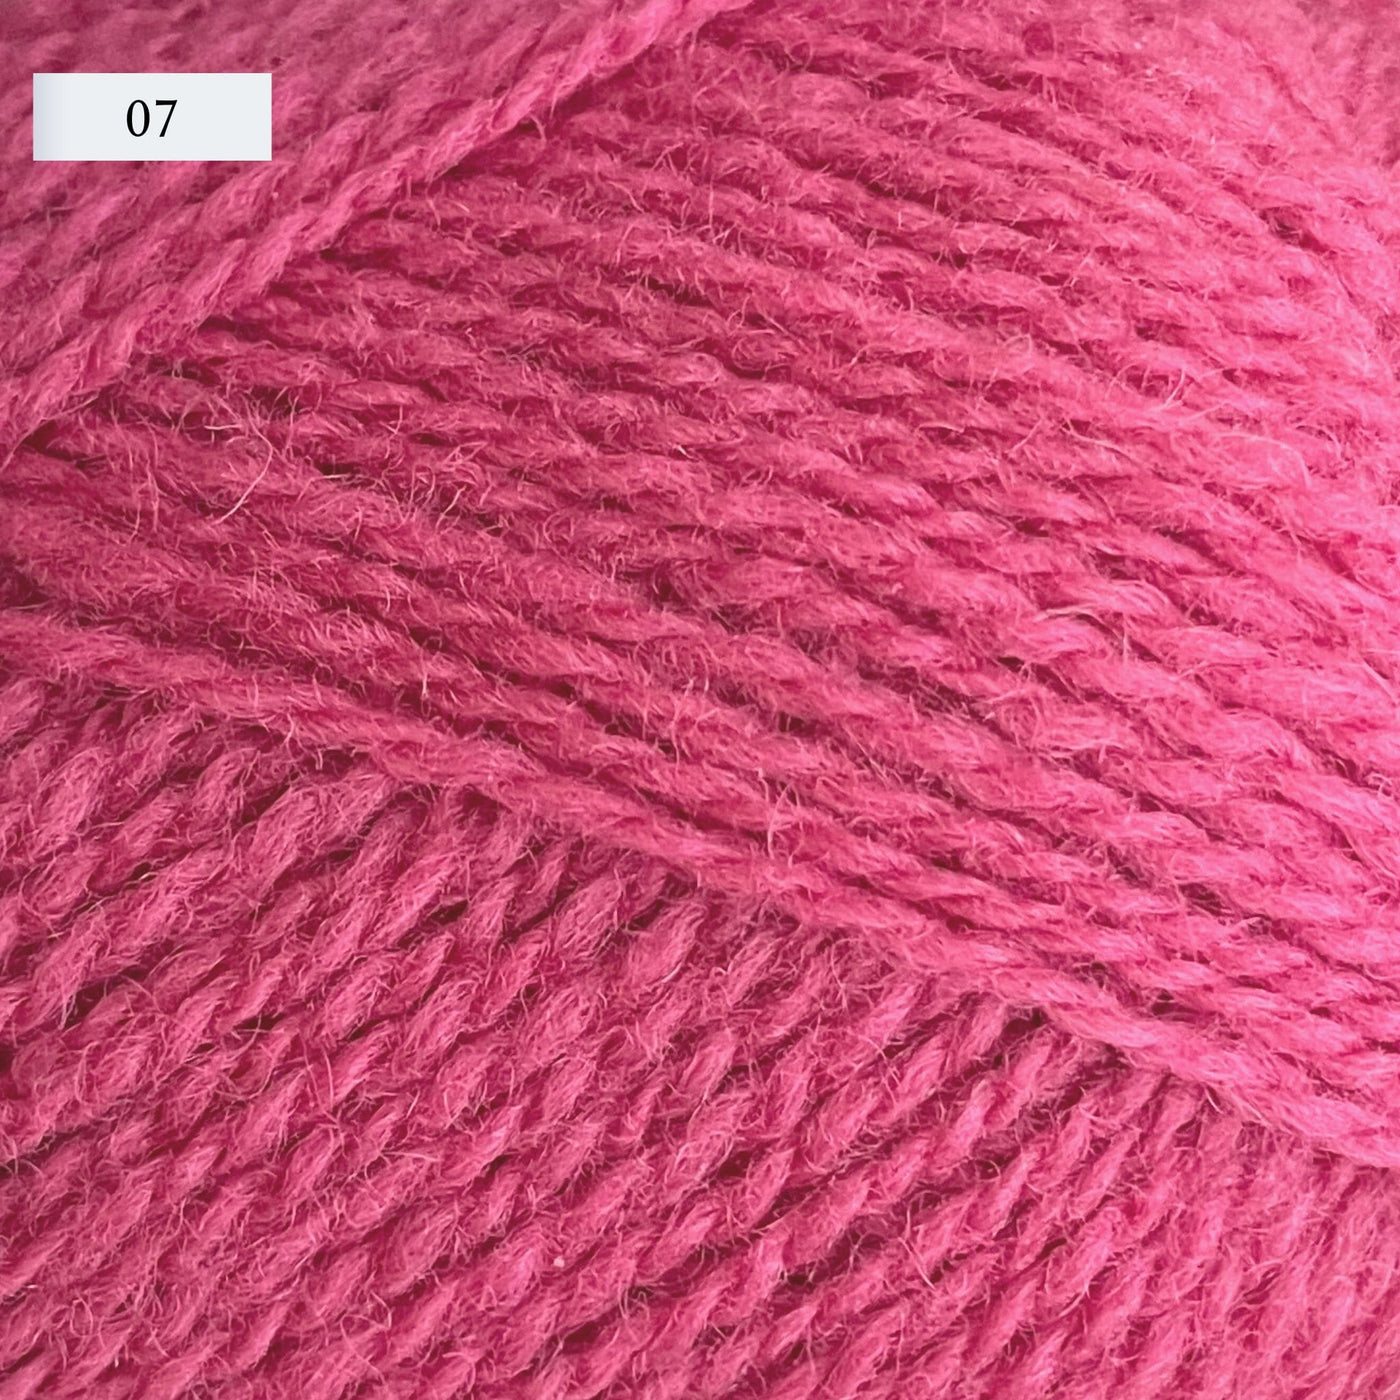 Jamieson & Smith 2ply Jumper Weight, light fingering weight yarn, in color 07, medium fuschia pink